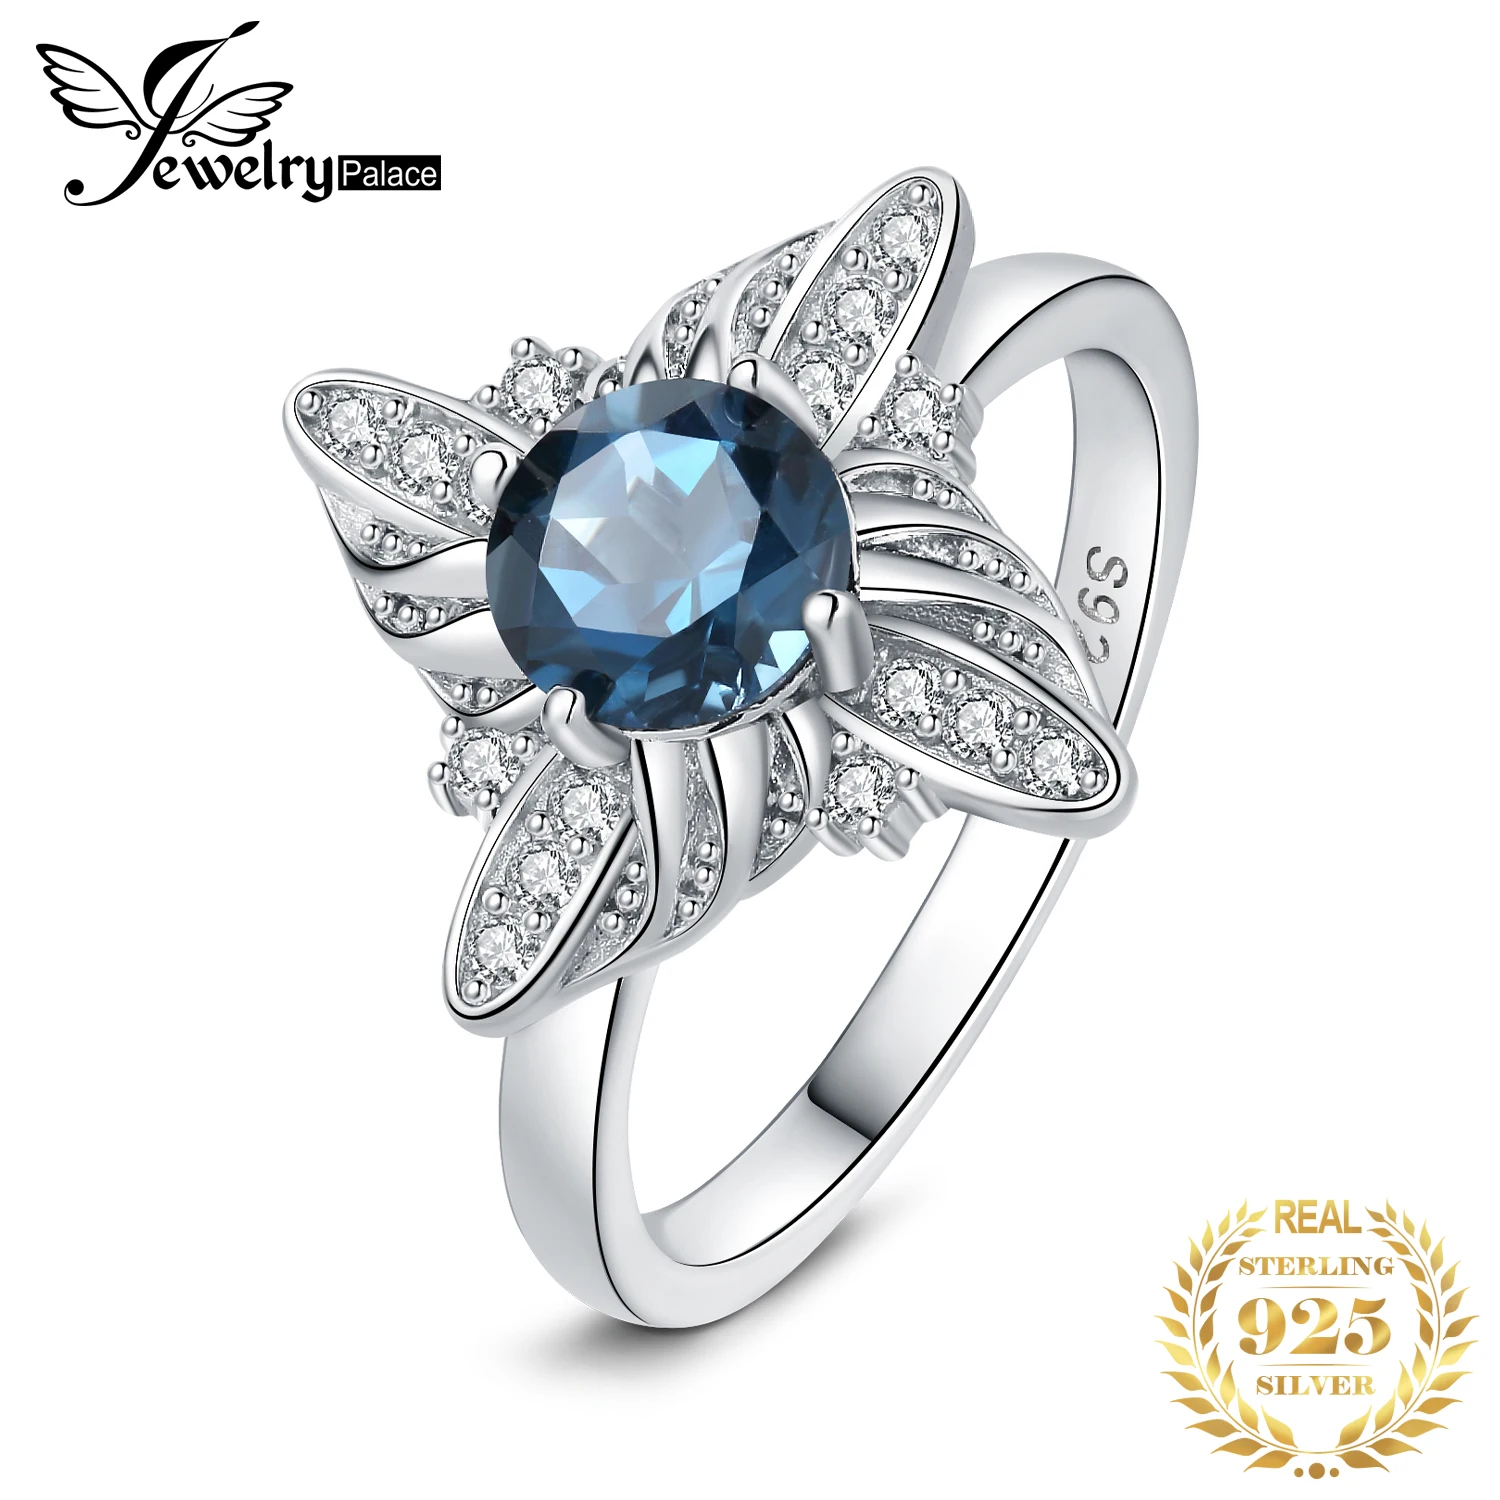 JewelryPalace New Arrival Luxury Windmill 1.2ct Natural London Blue Topaz 925 Sterling Silver Statement Ring for Woman Fine Gift